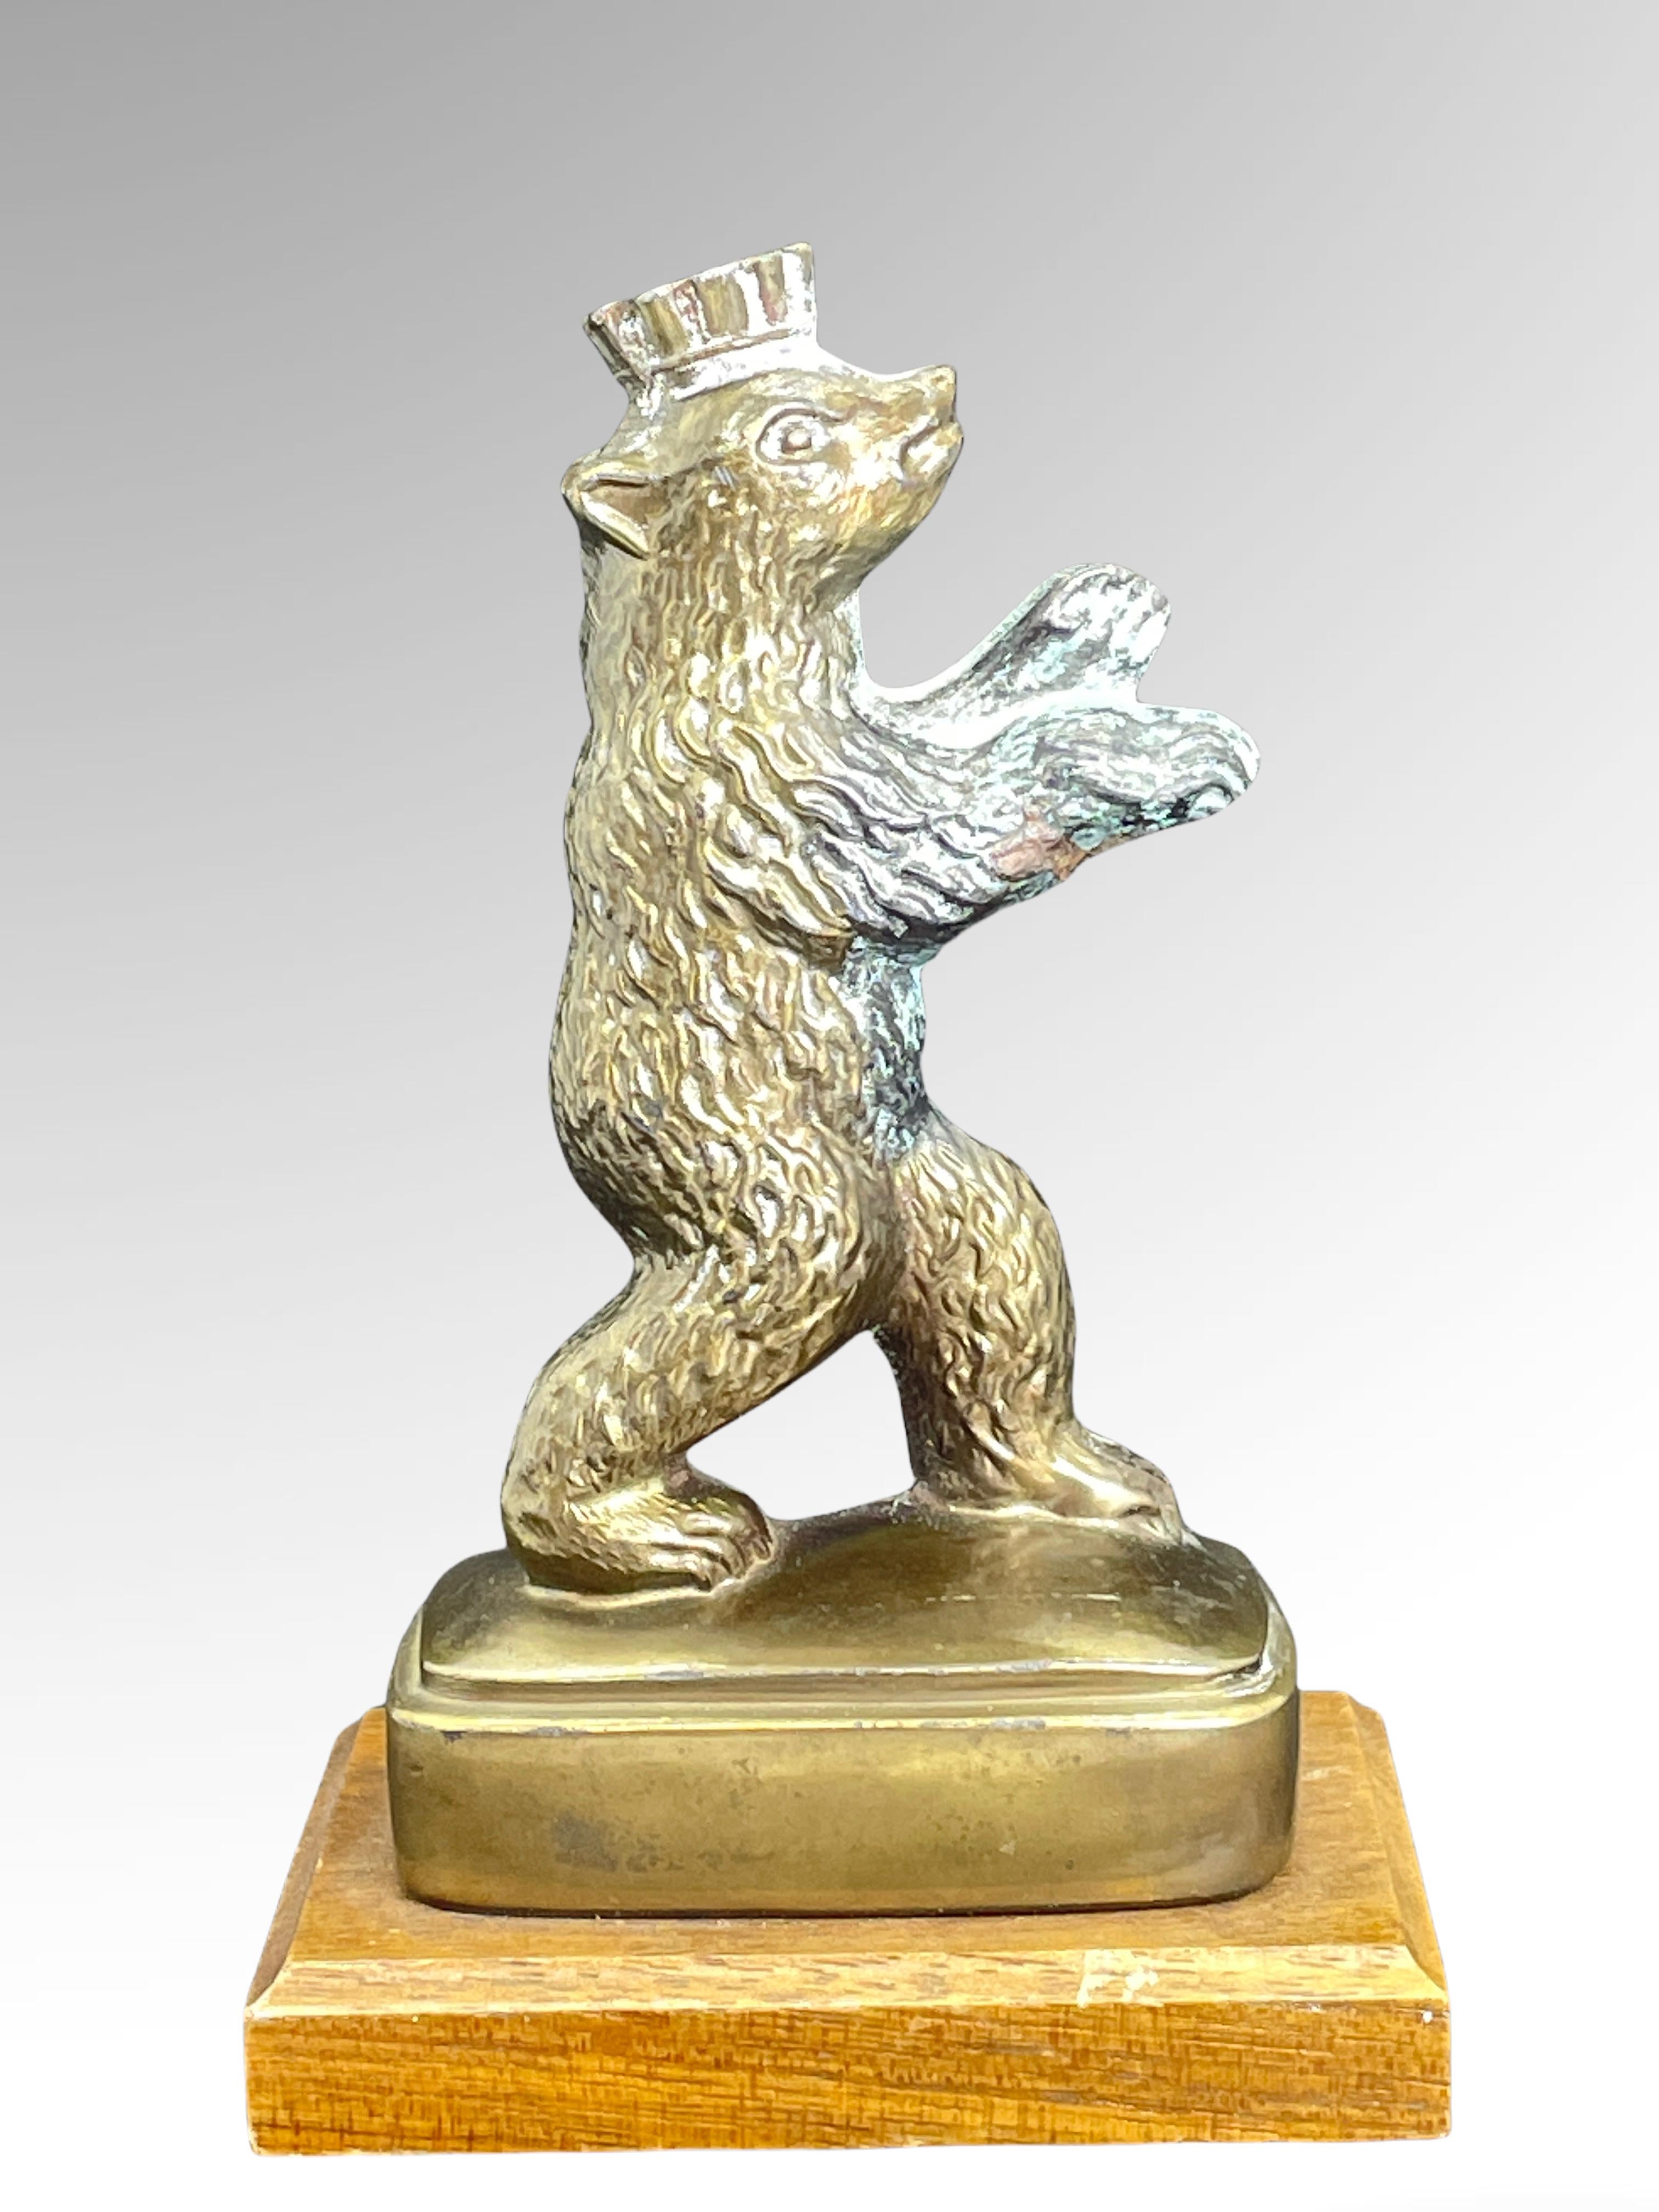 A classic decorative Berlin bear statue. Some wear with a nice patina, but this is old-age. Made of metal, fixed on a wooden base. This item was bought as a souvenir in Berlin and was made in the mid-20th century probably to the end of 1960s.